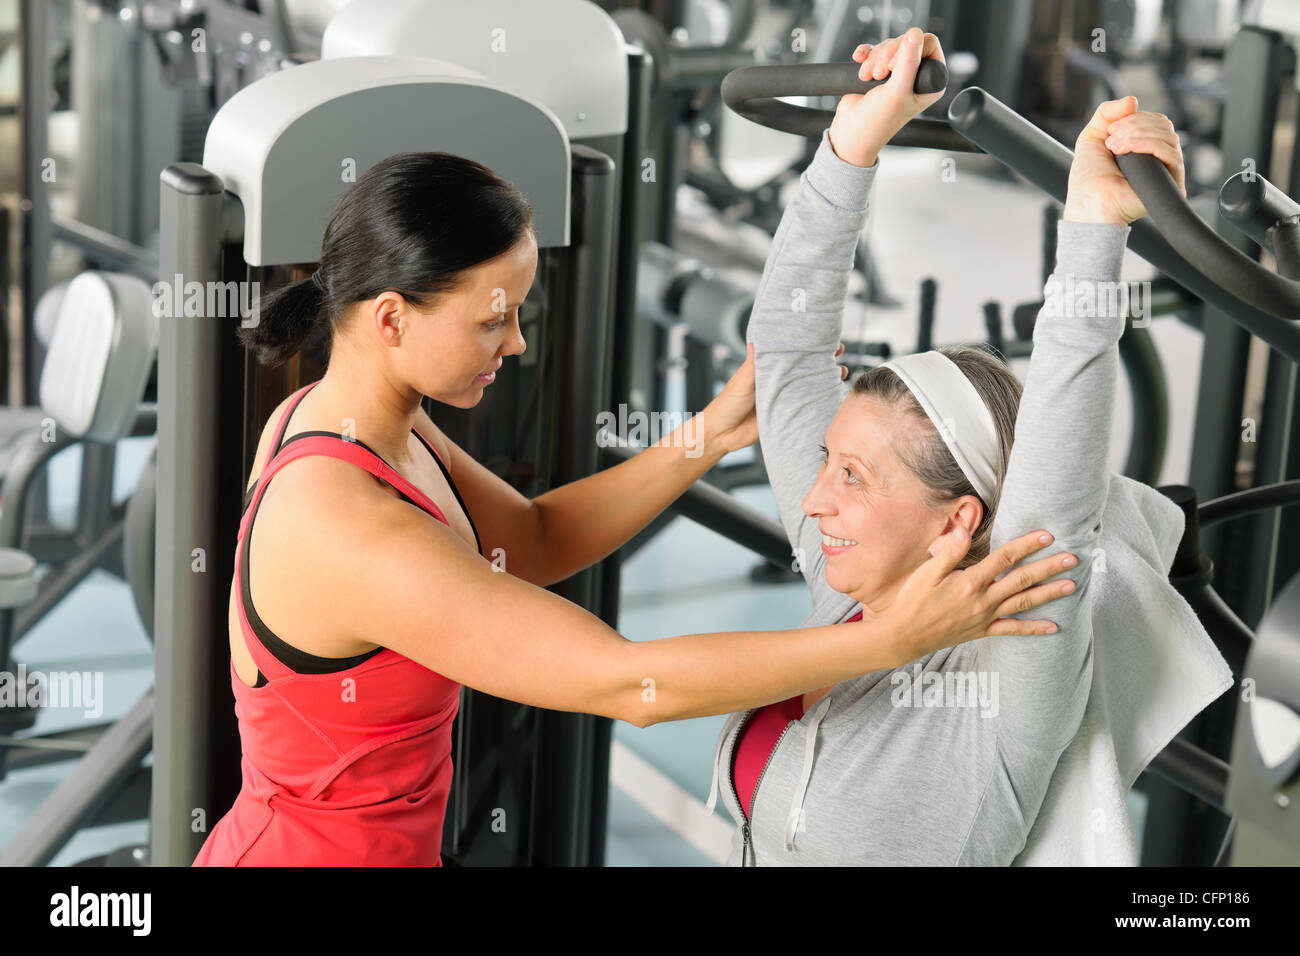 Senior woman exercise on shoulder press machine with personal trainer Stock Photo